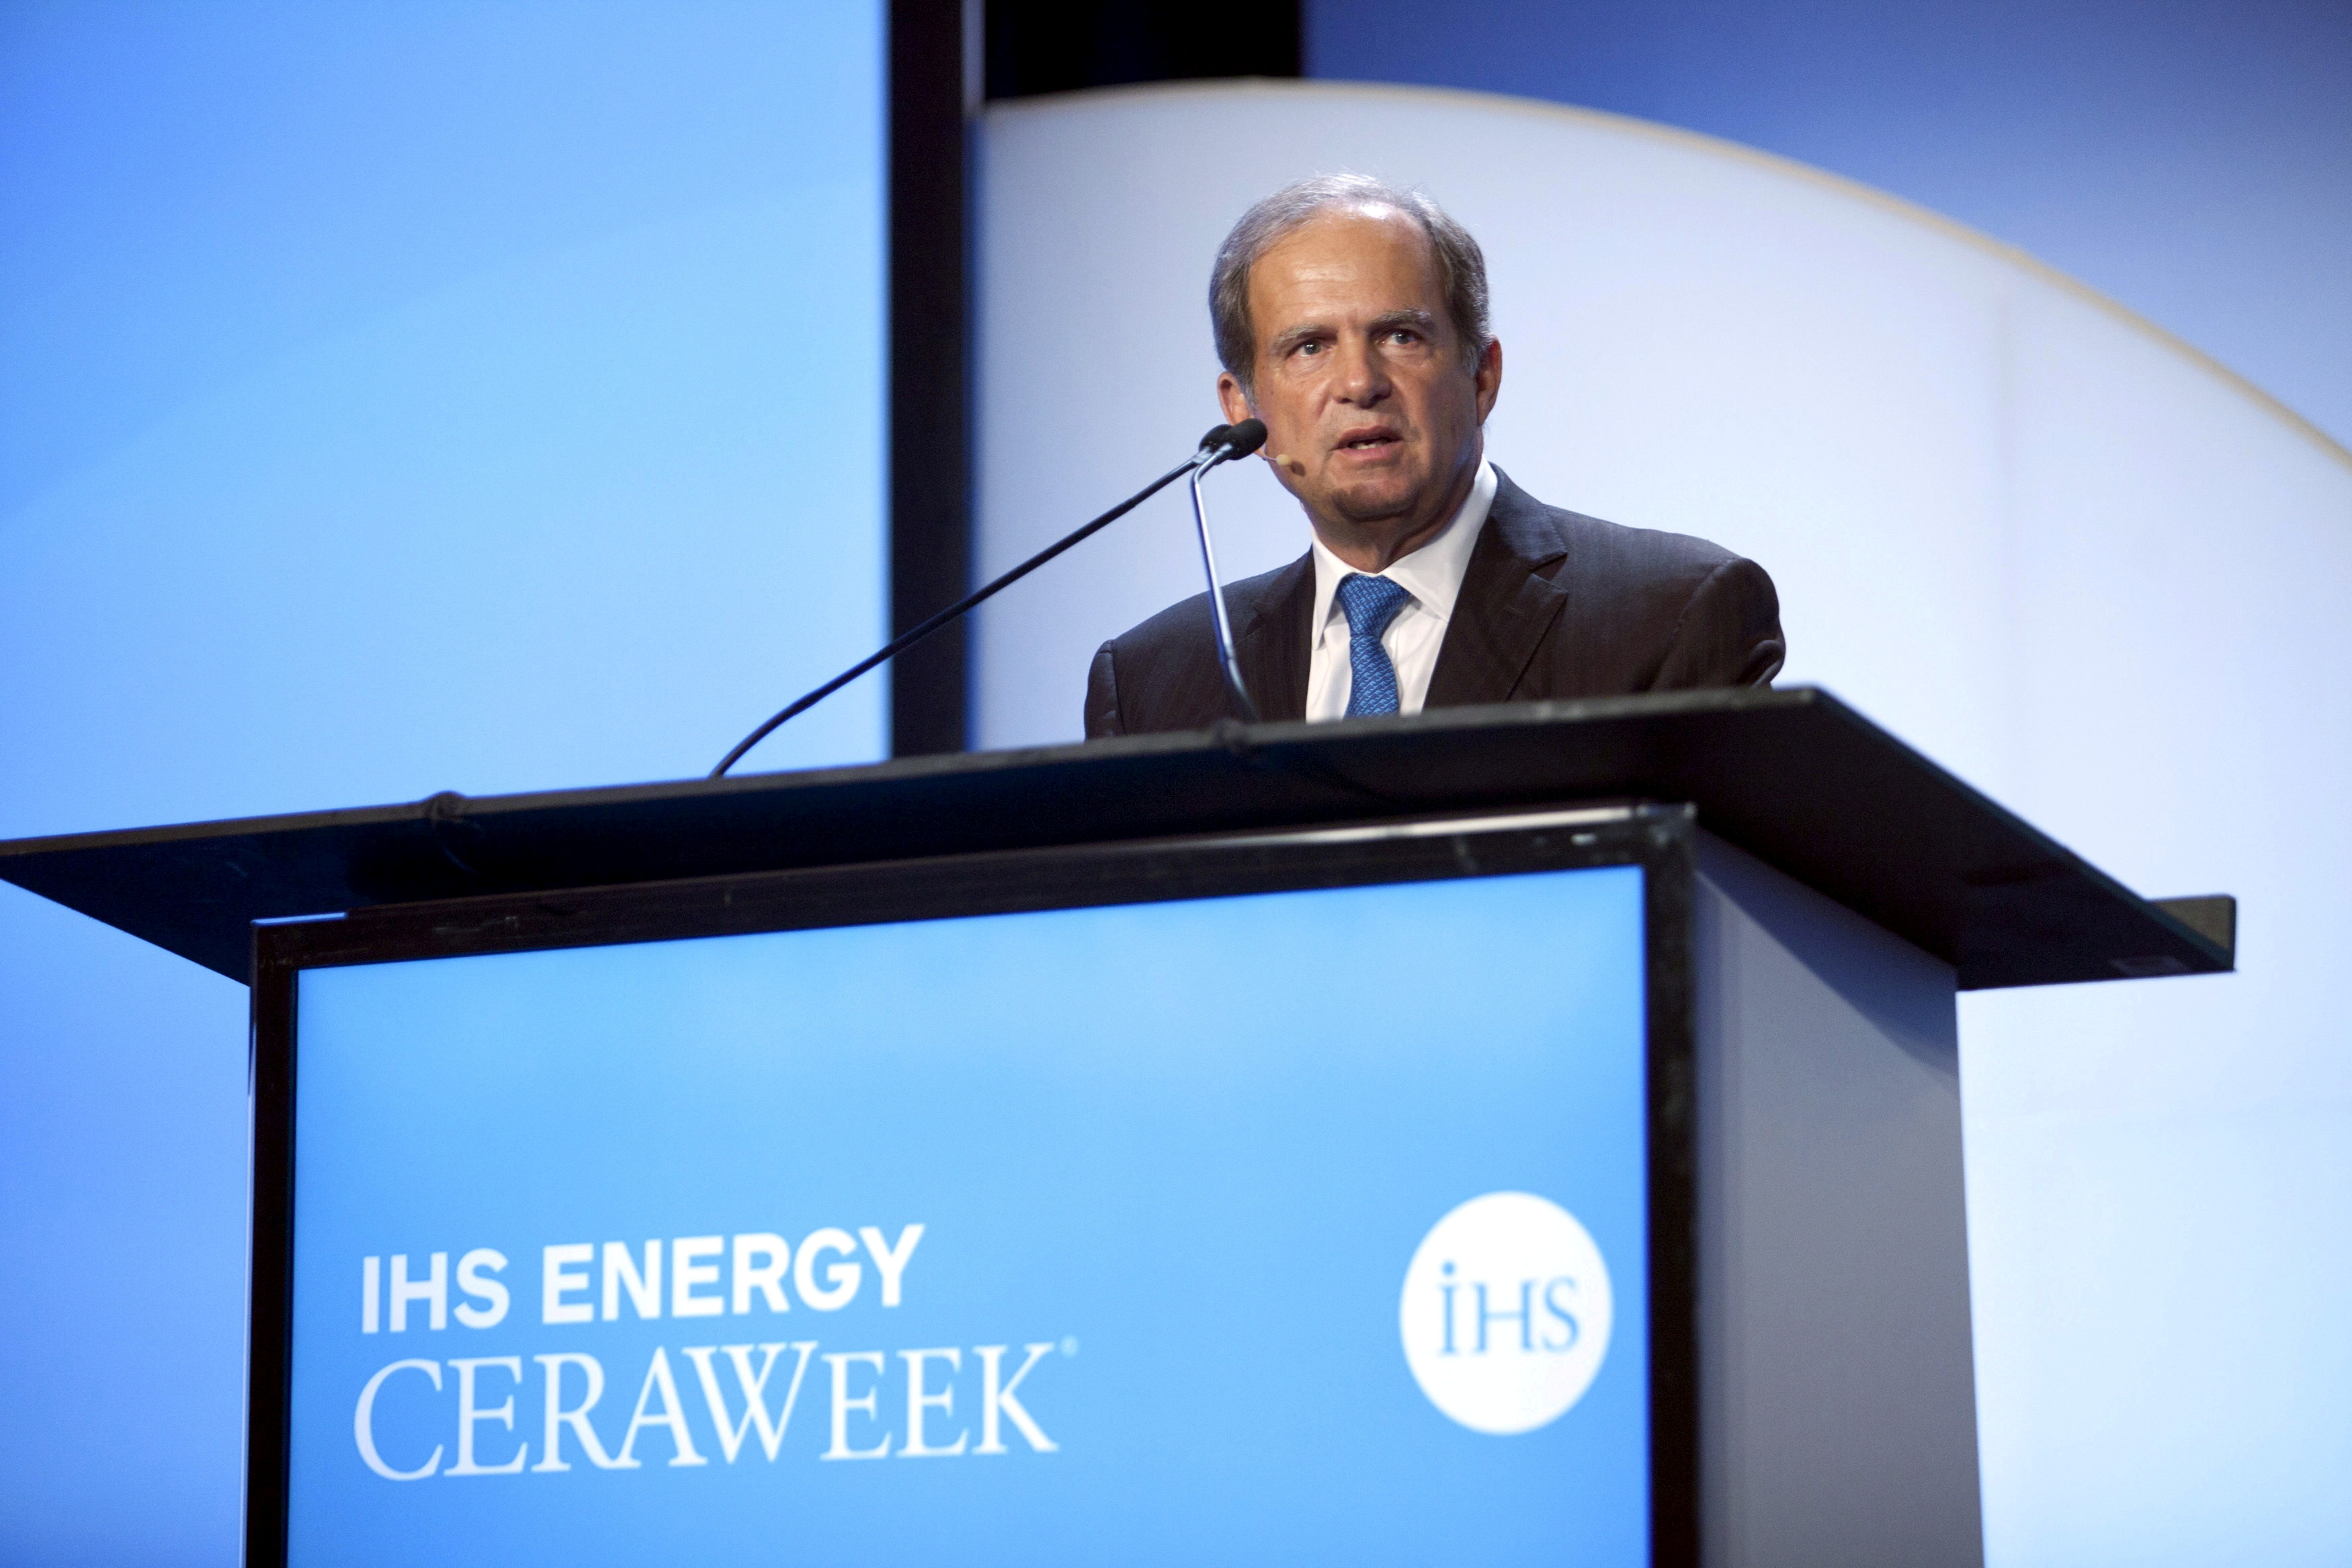 Scott Sheffield, CEO of Pioneer Resources, speaks during the IHS CERAWeek 2015 energy conference in Houston, Texas April 21, 2015. REUTERS/Daniel Kramer